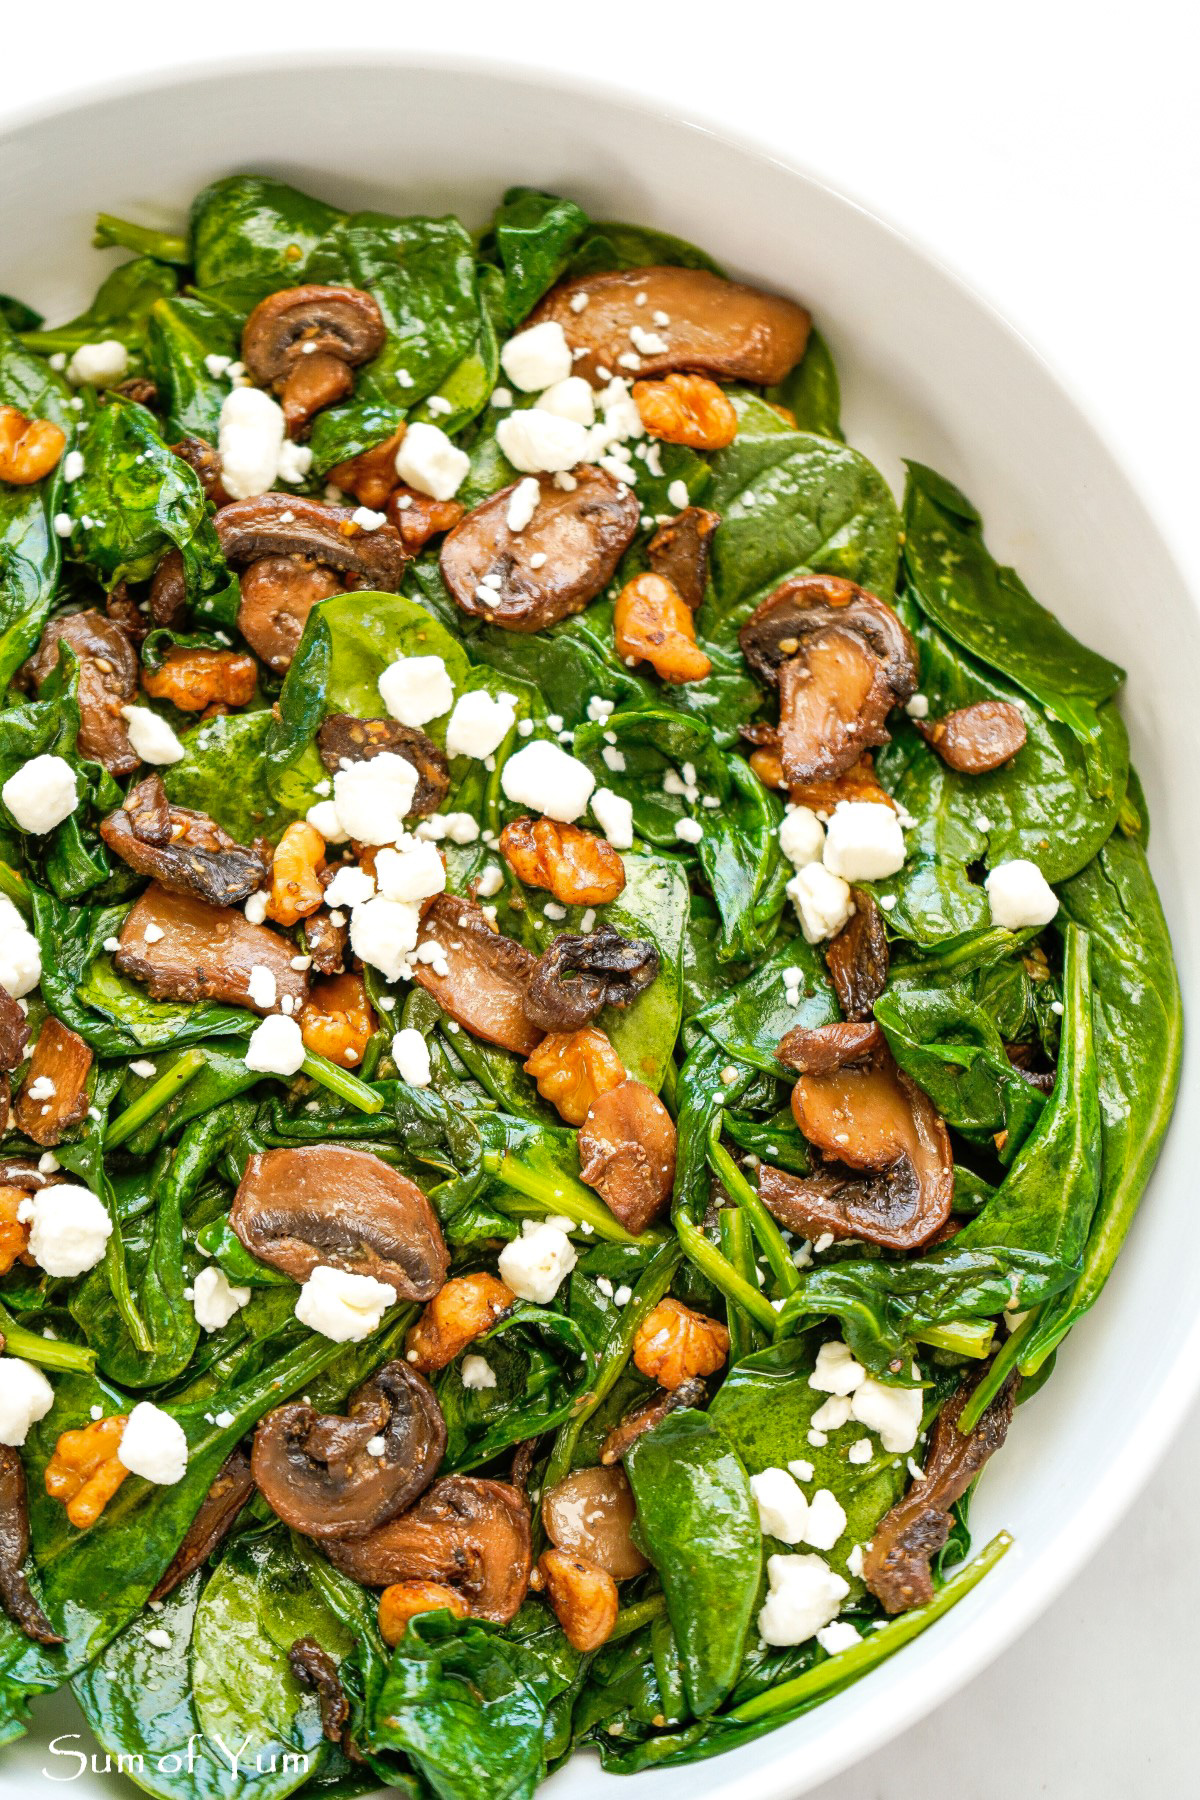 Warm Spinach Salad with Mushrooms, Walnuts and Goat Cheese